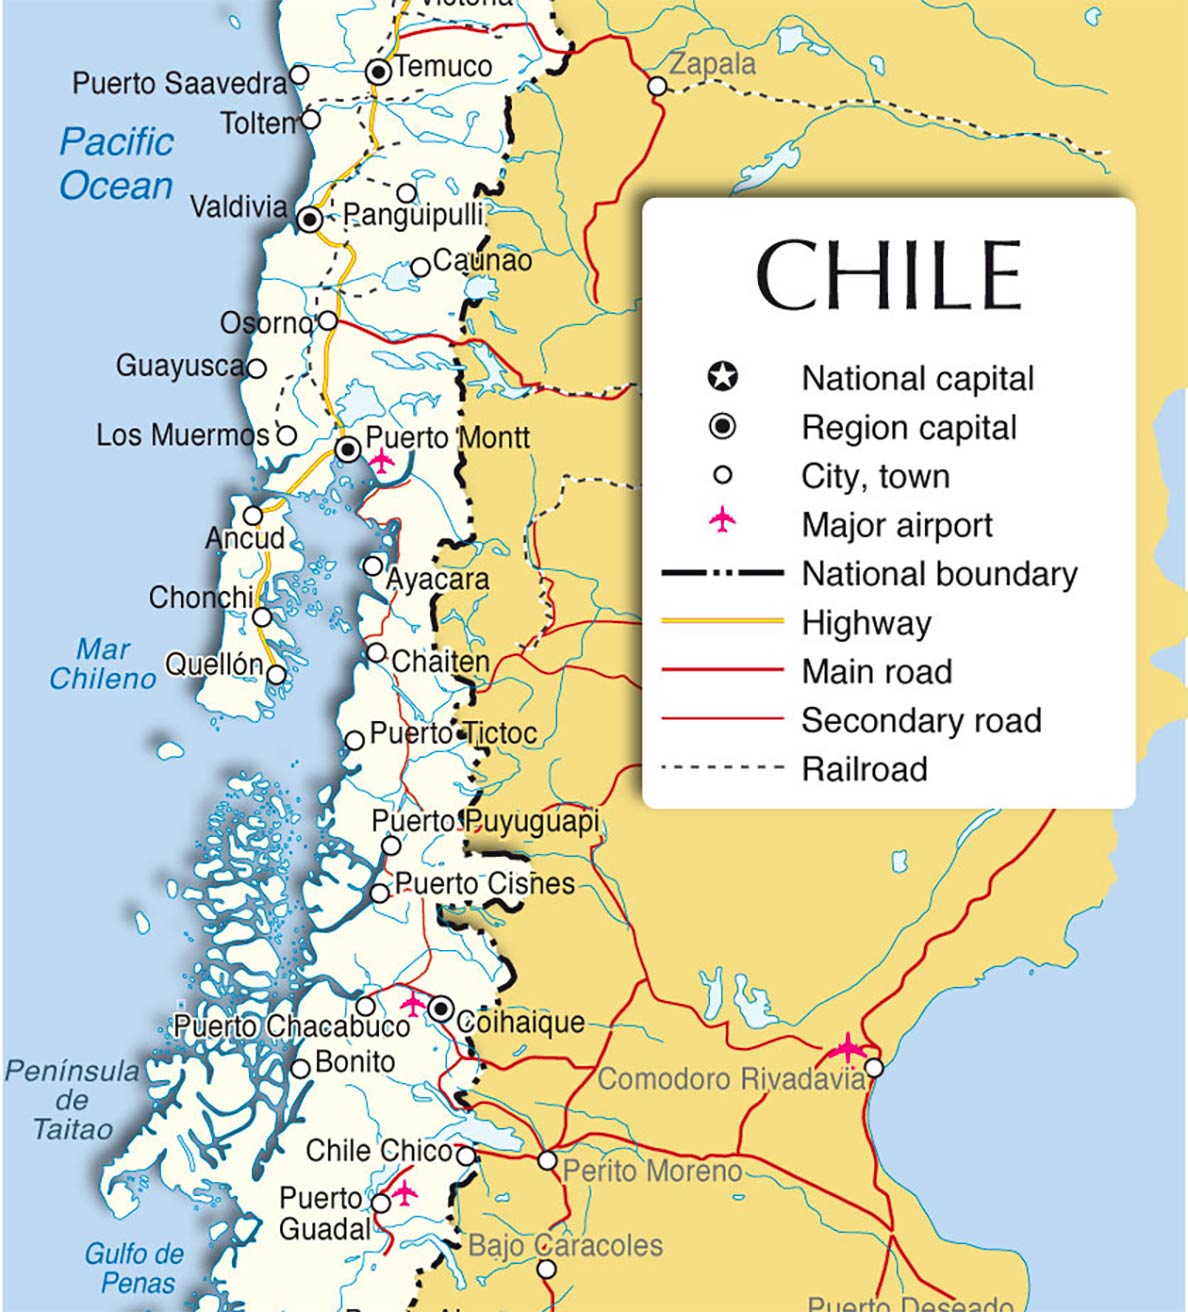 Chile Political Map